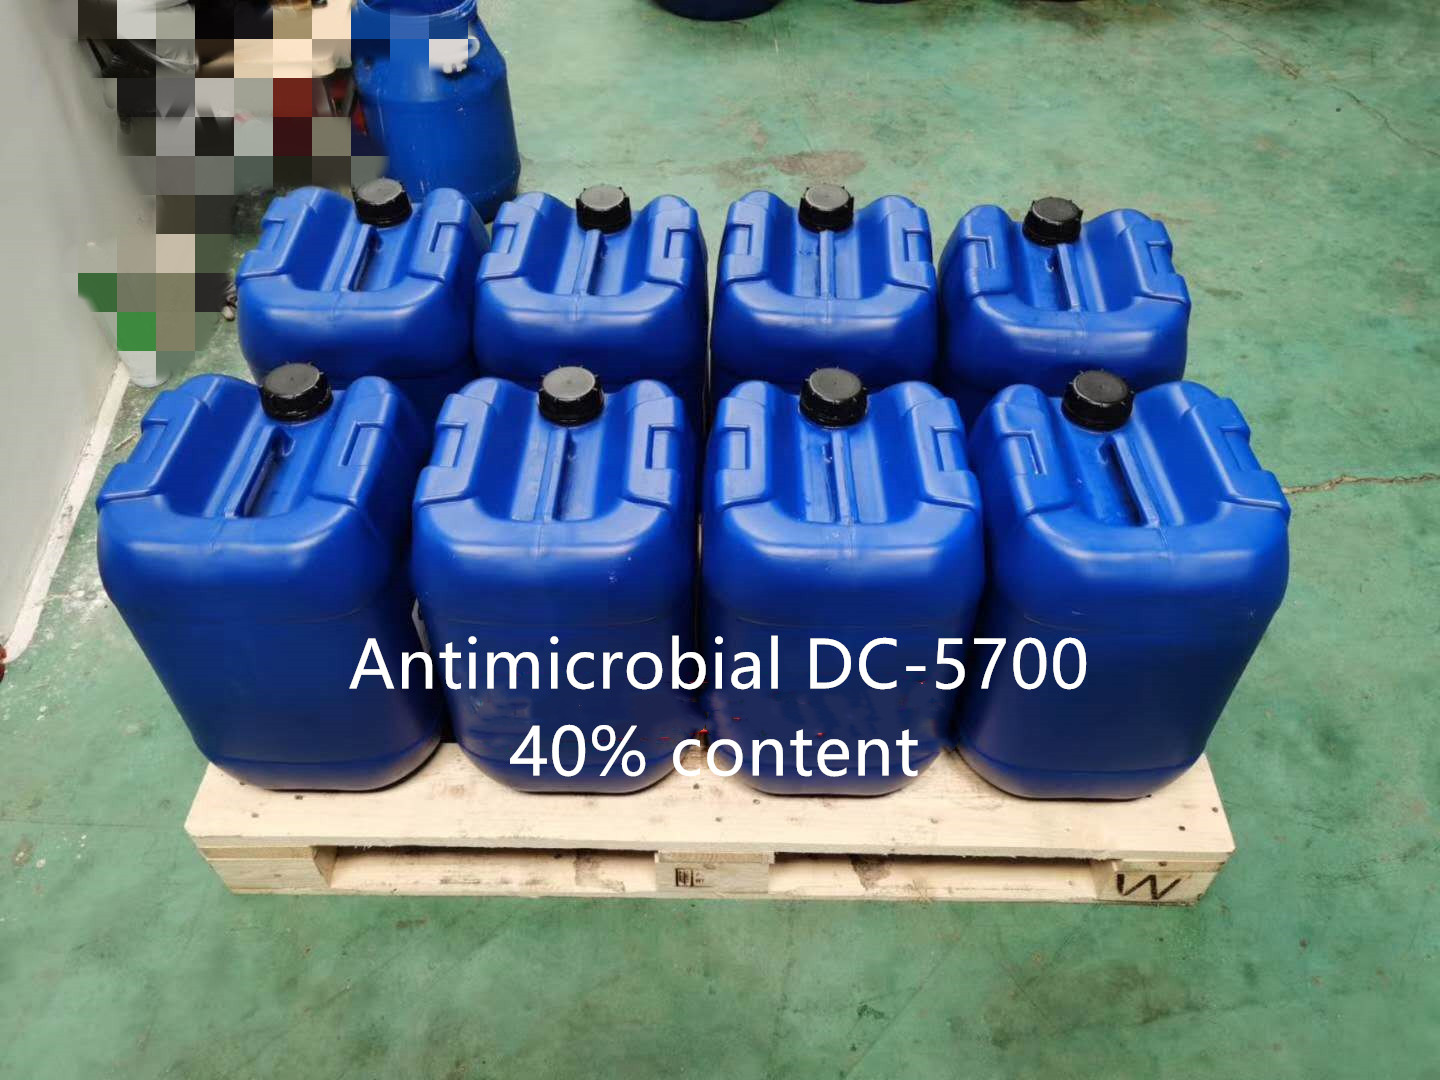 Antimicrobial agent DC-5700